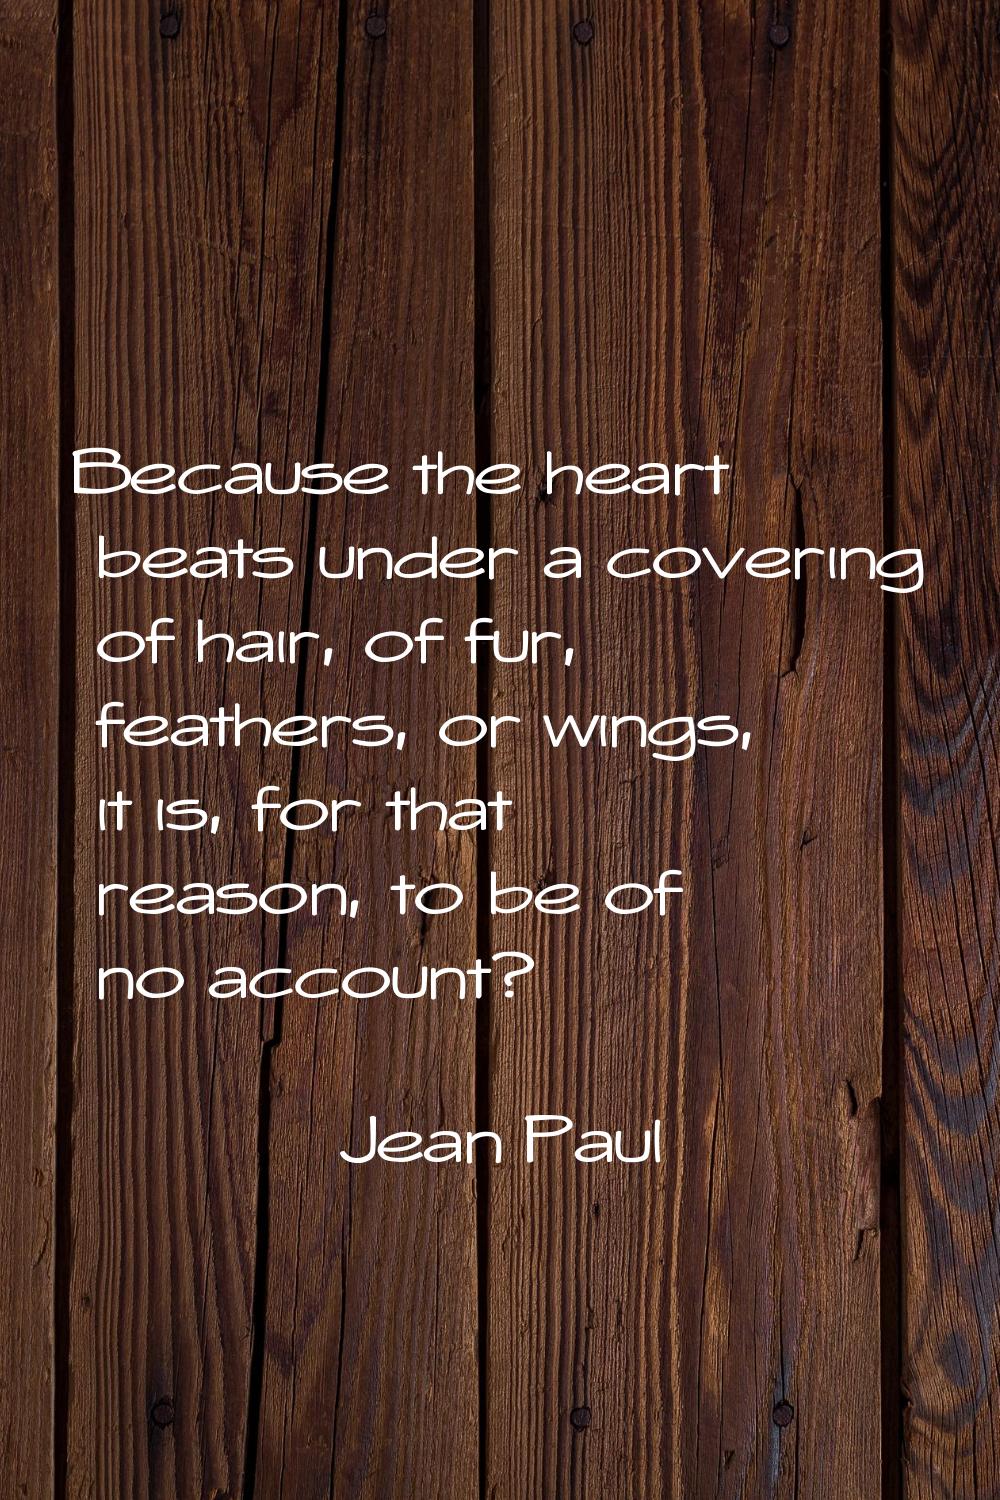 Because the heart beats under a covering of hair, of fur, feathers, or wings, it is, for that reaso